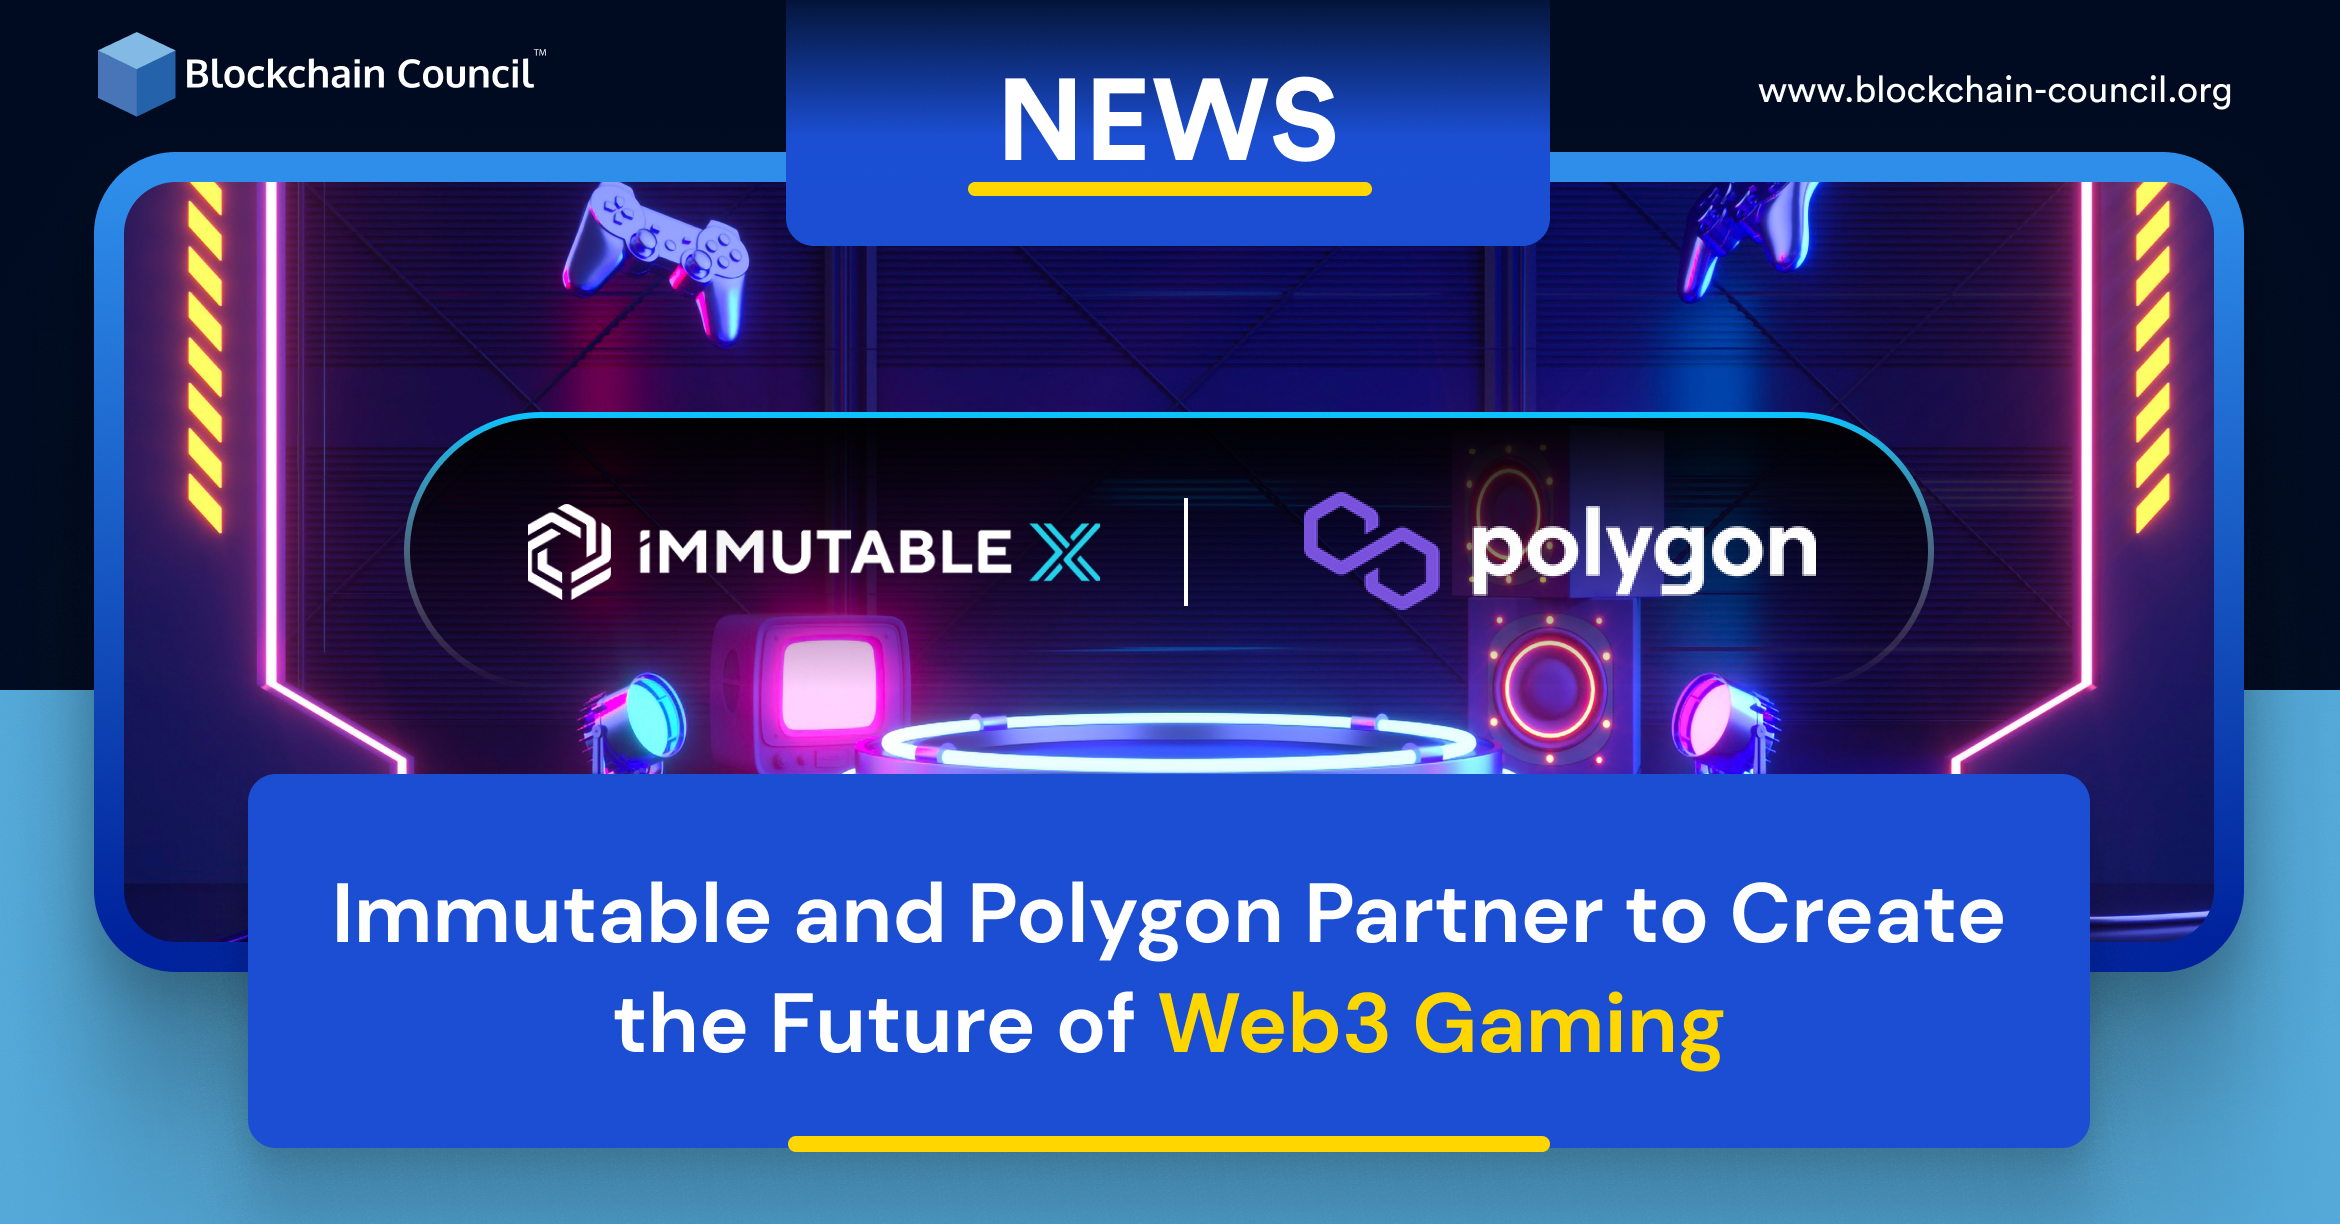 Immutable and Polygon Partner to Create the Future of Web3 Gaming